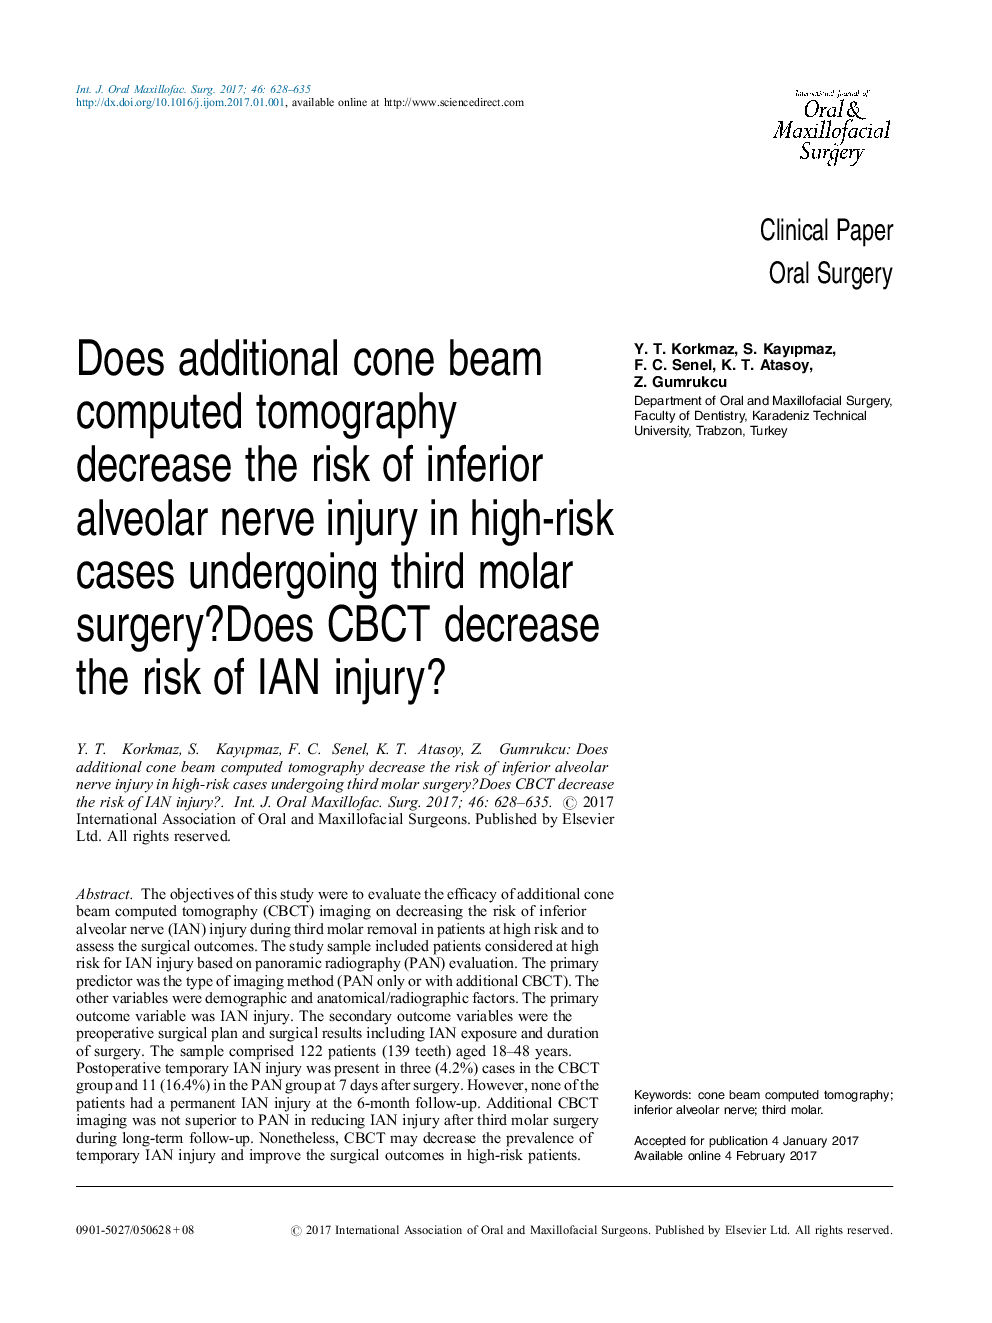 Does additional cone beam computed tomography decrease the risk of inferior alveolar nerve injury in high-risk cases undergoing third molar surgery?Does CBCT decrease the risk of IAN injury?